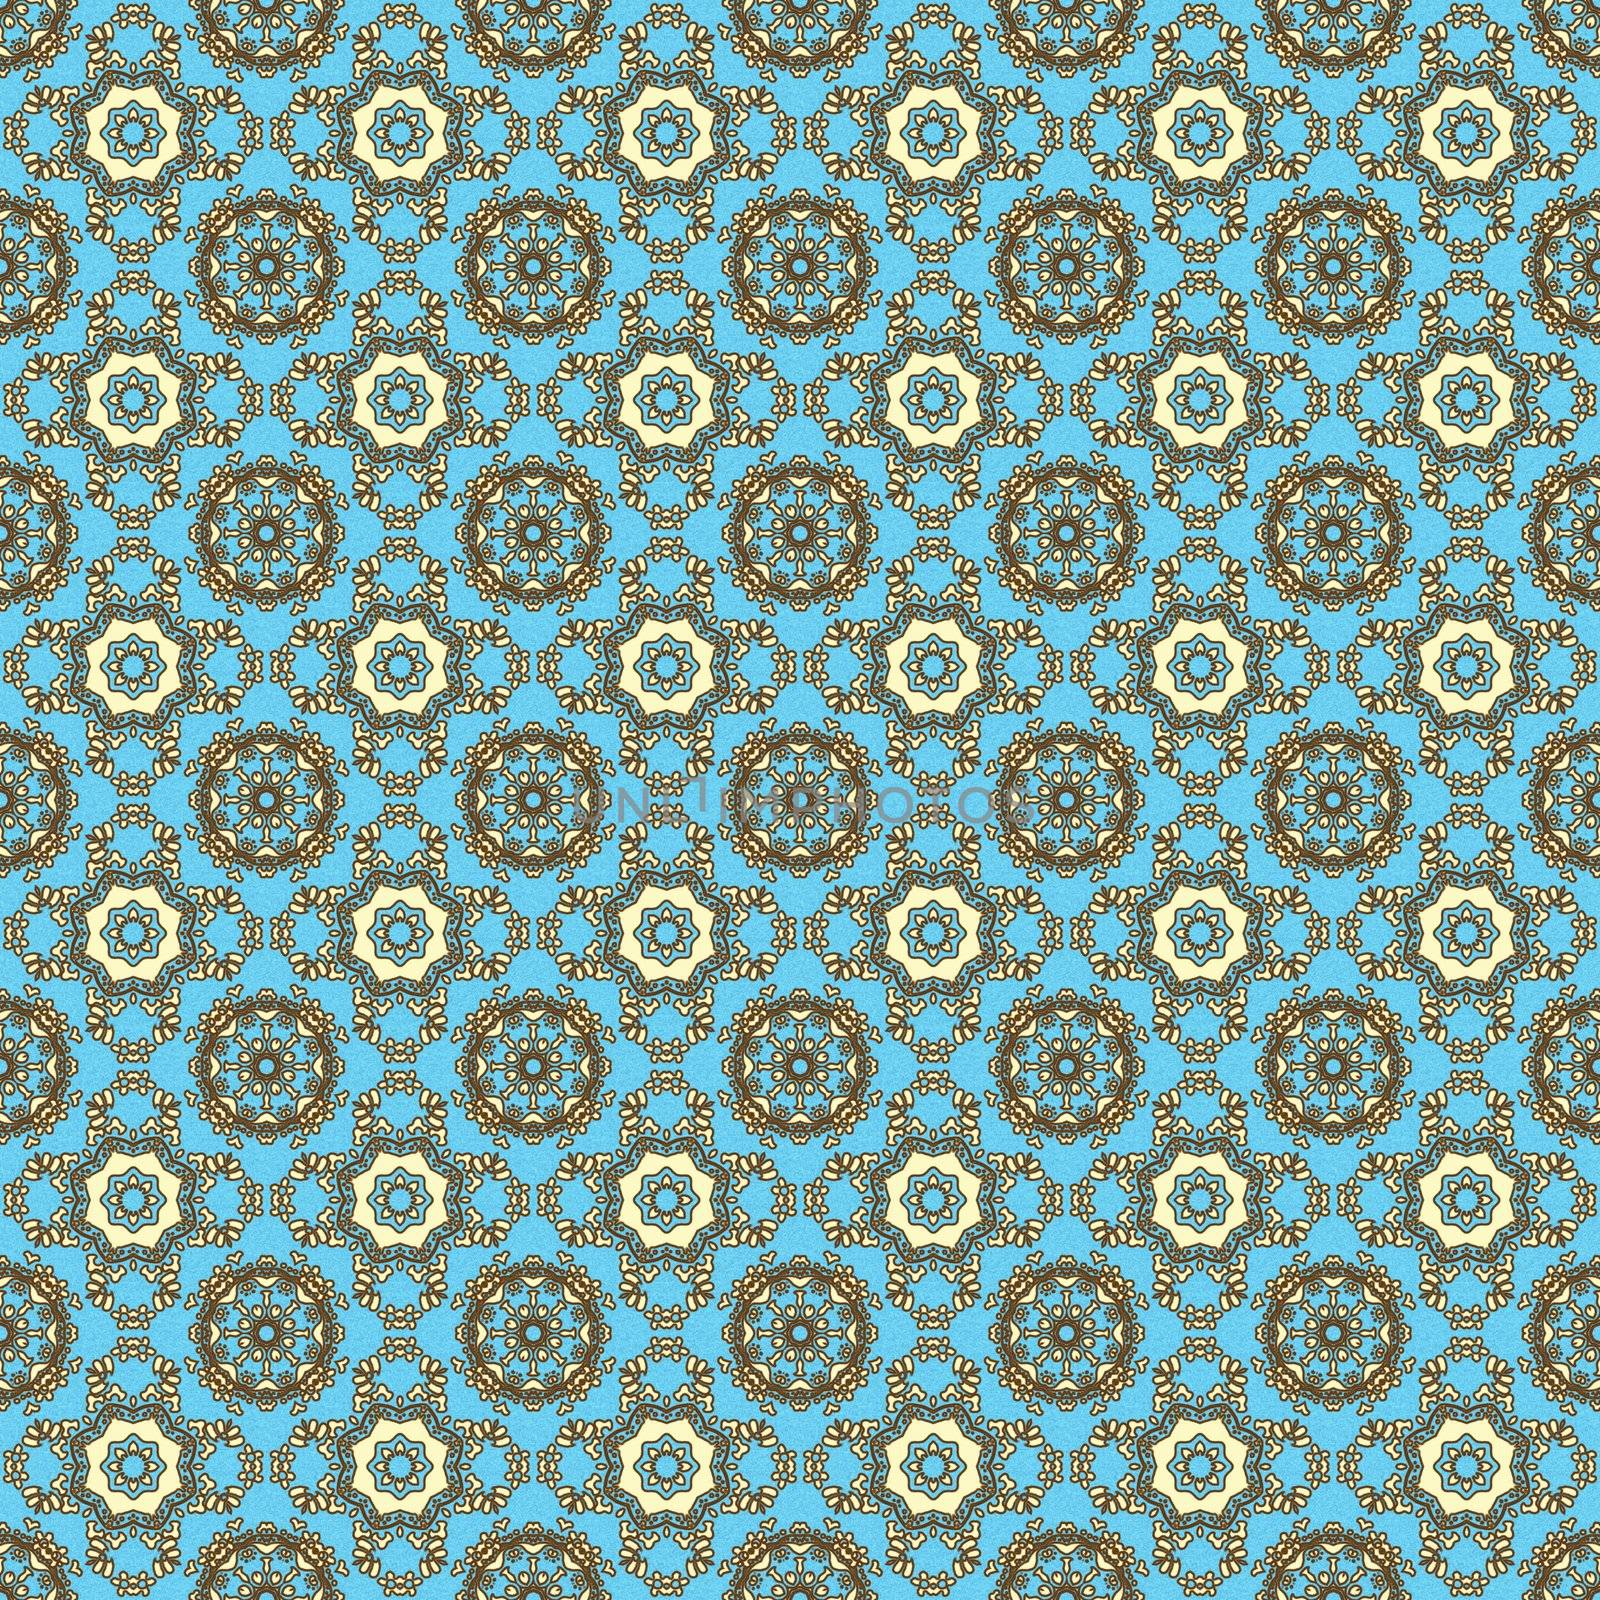 Seamless Aqua & Brown Medallions by SongPixels